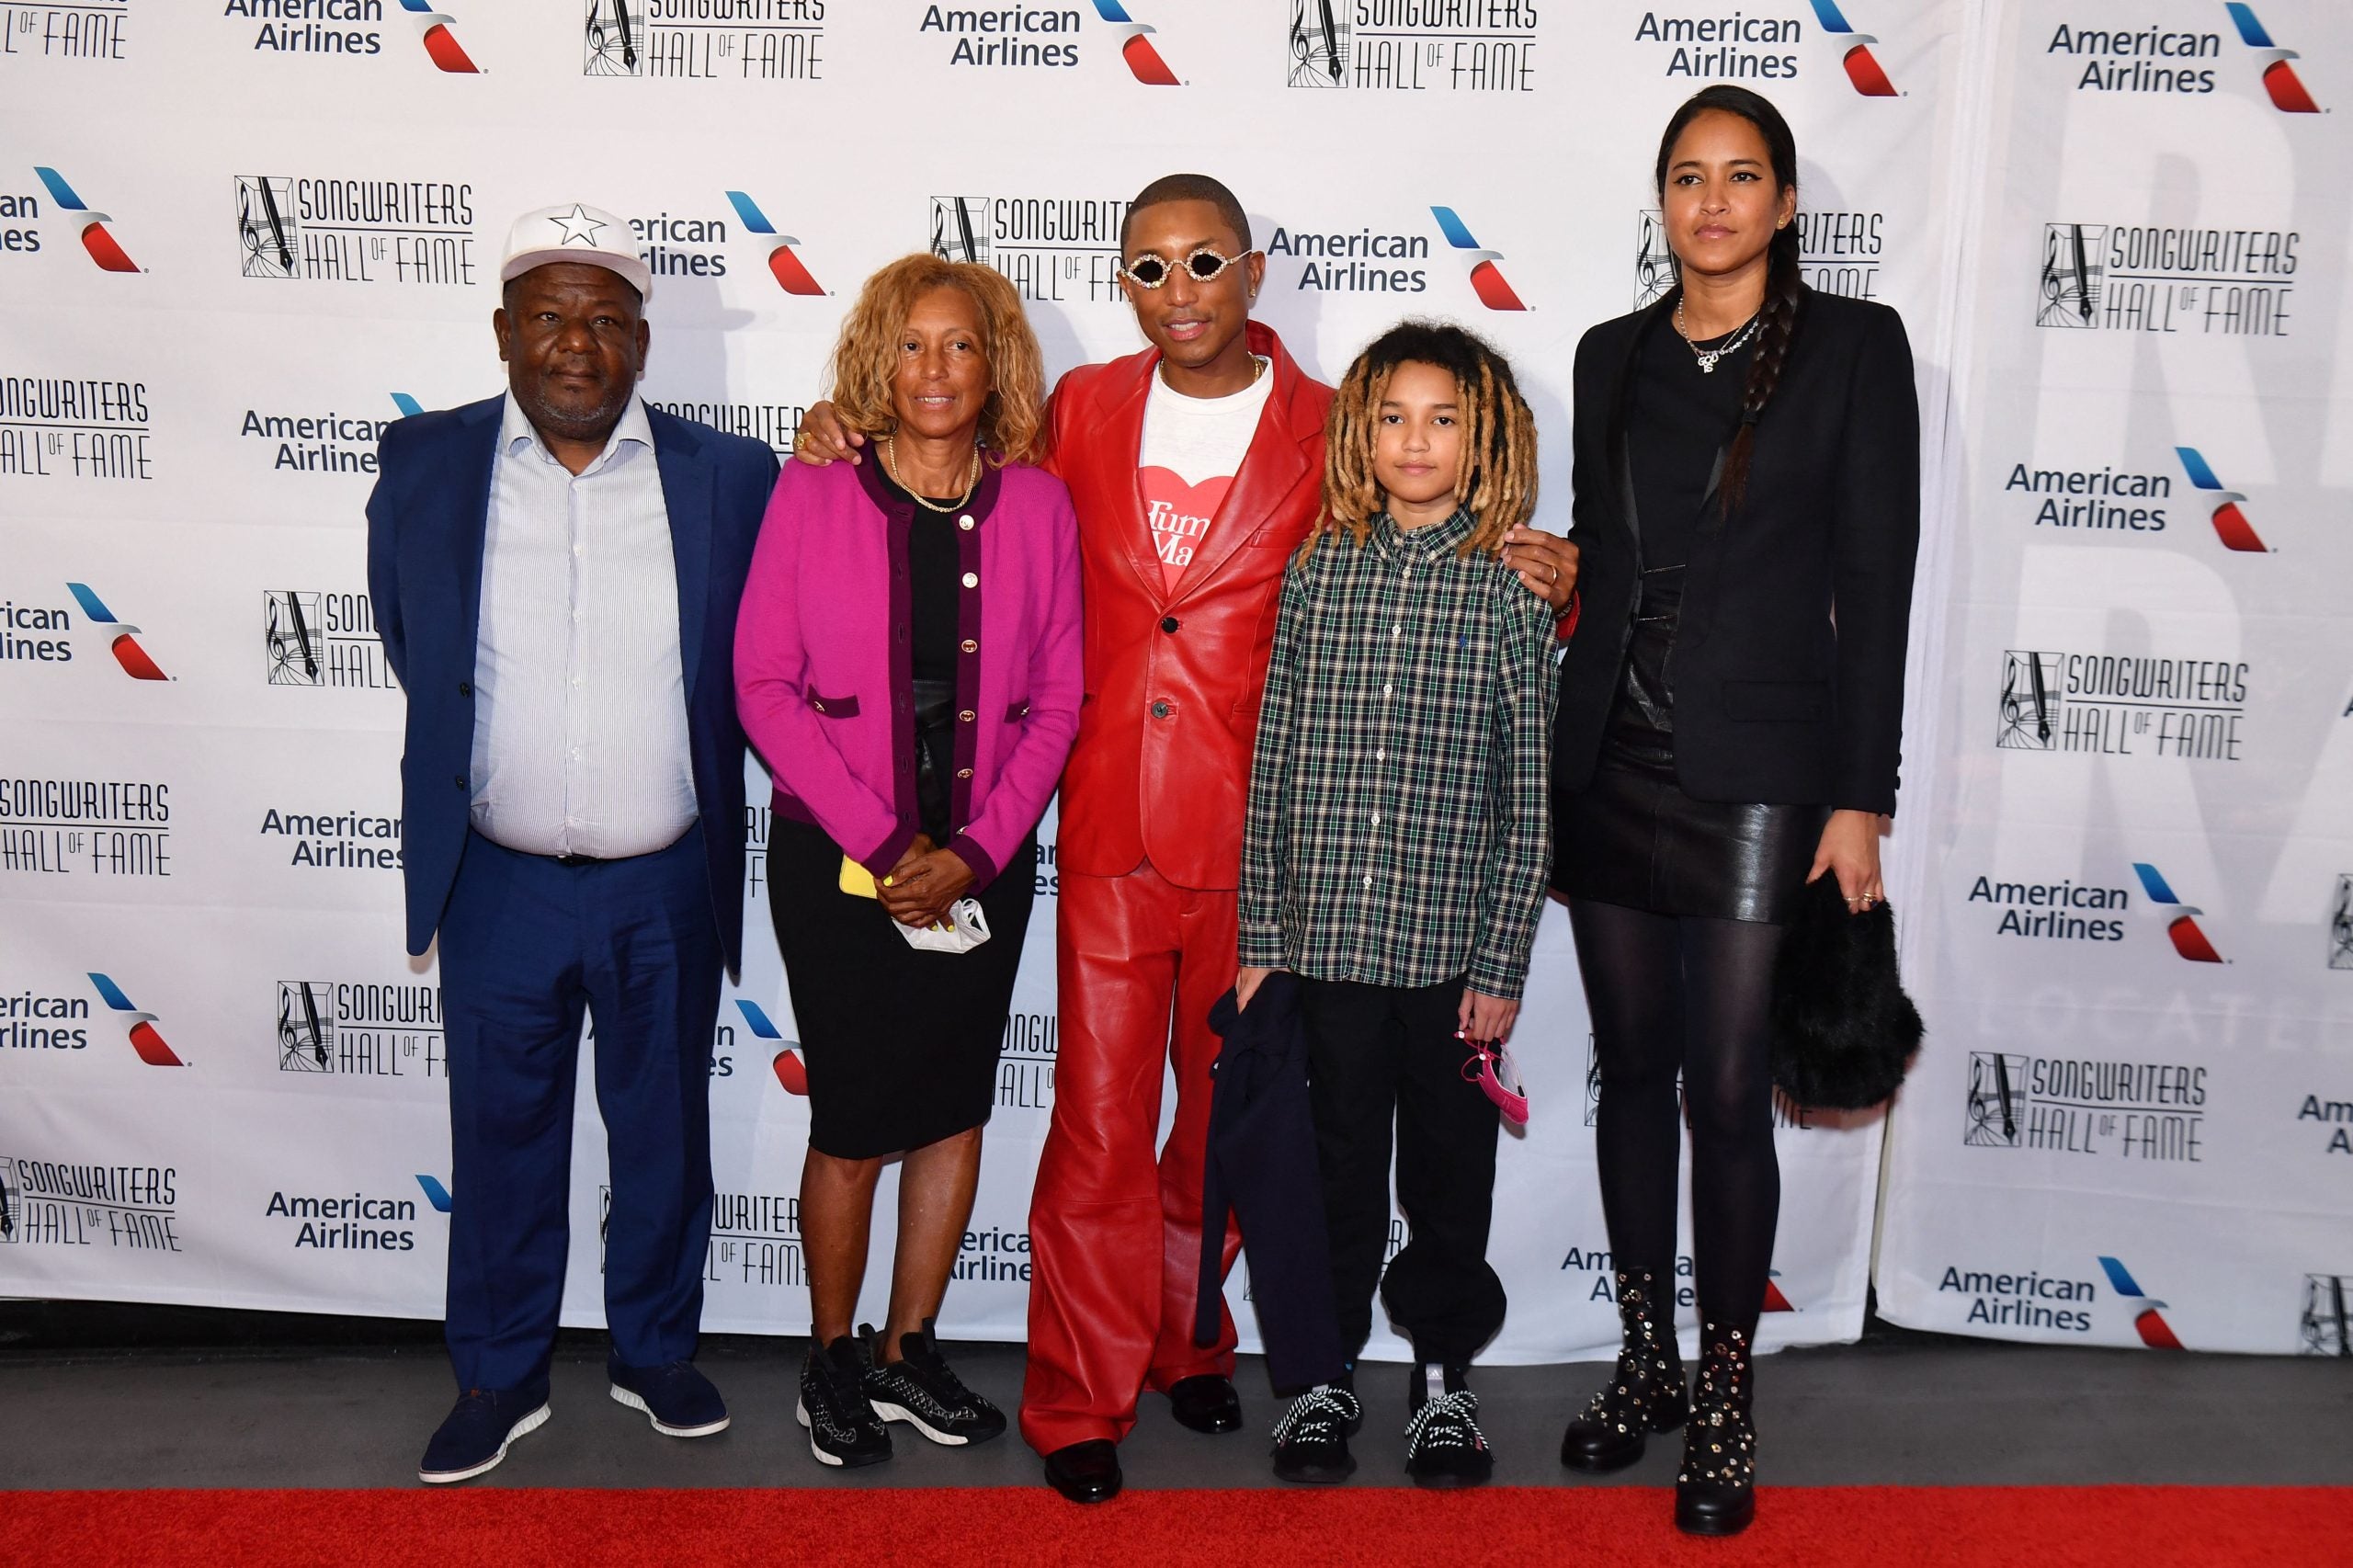 Pharrell Williams shares rare family photo with wife and son